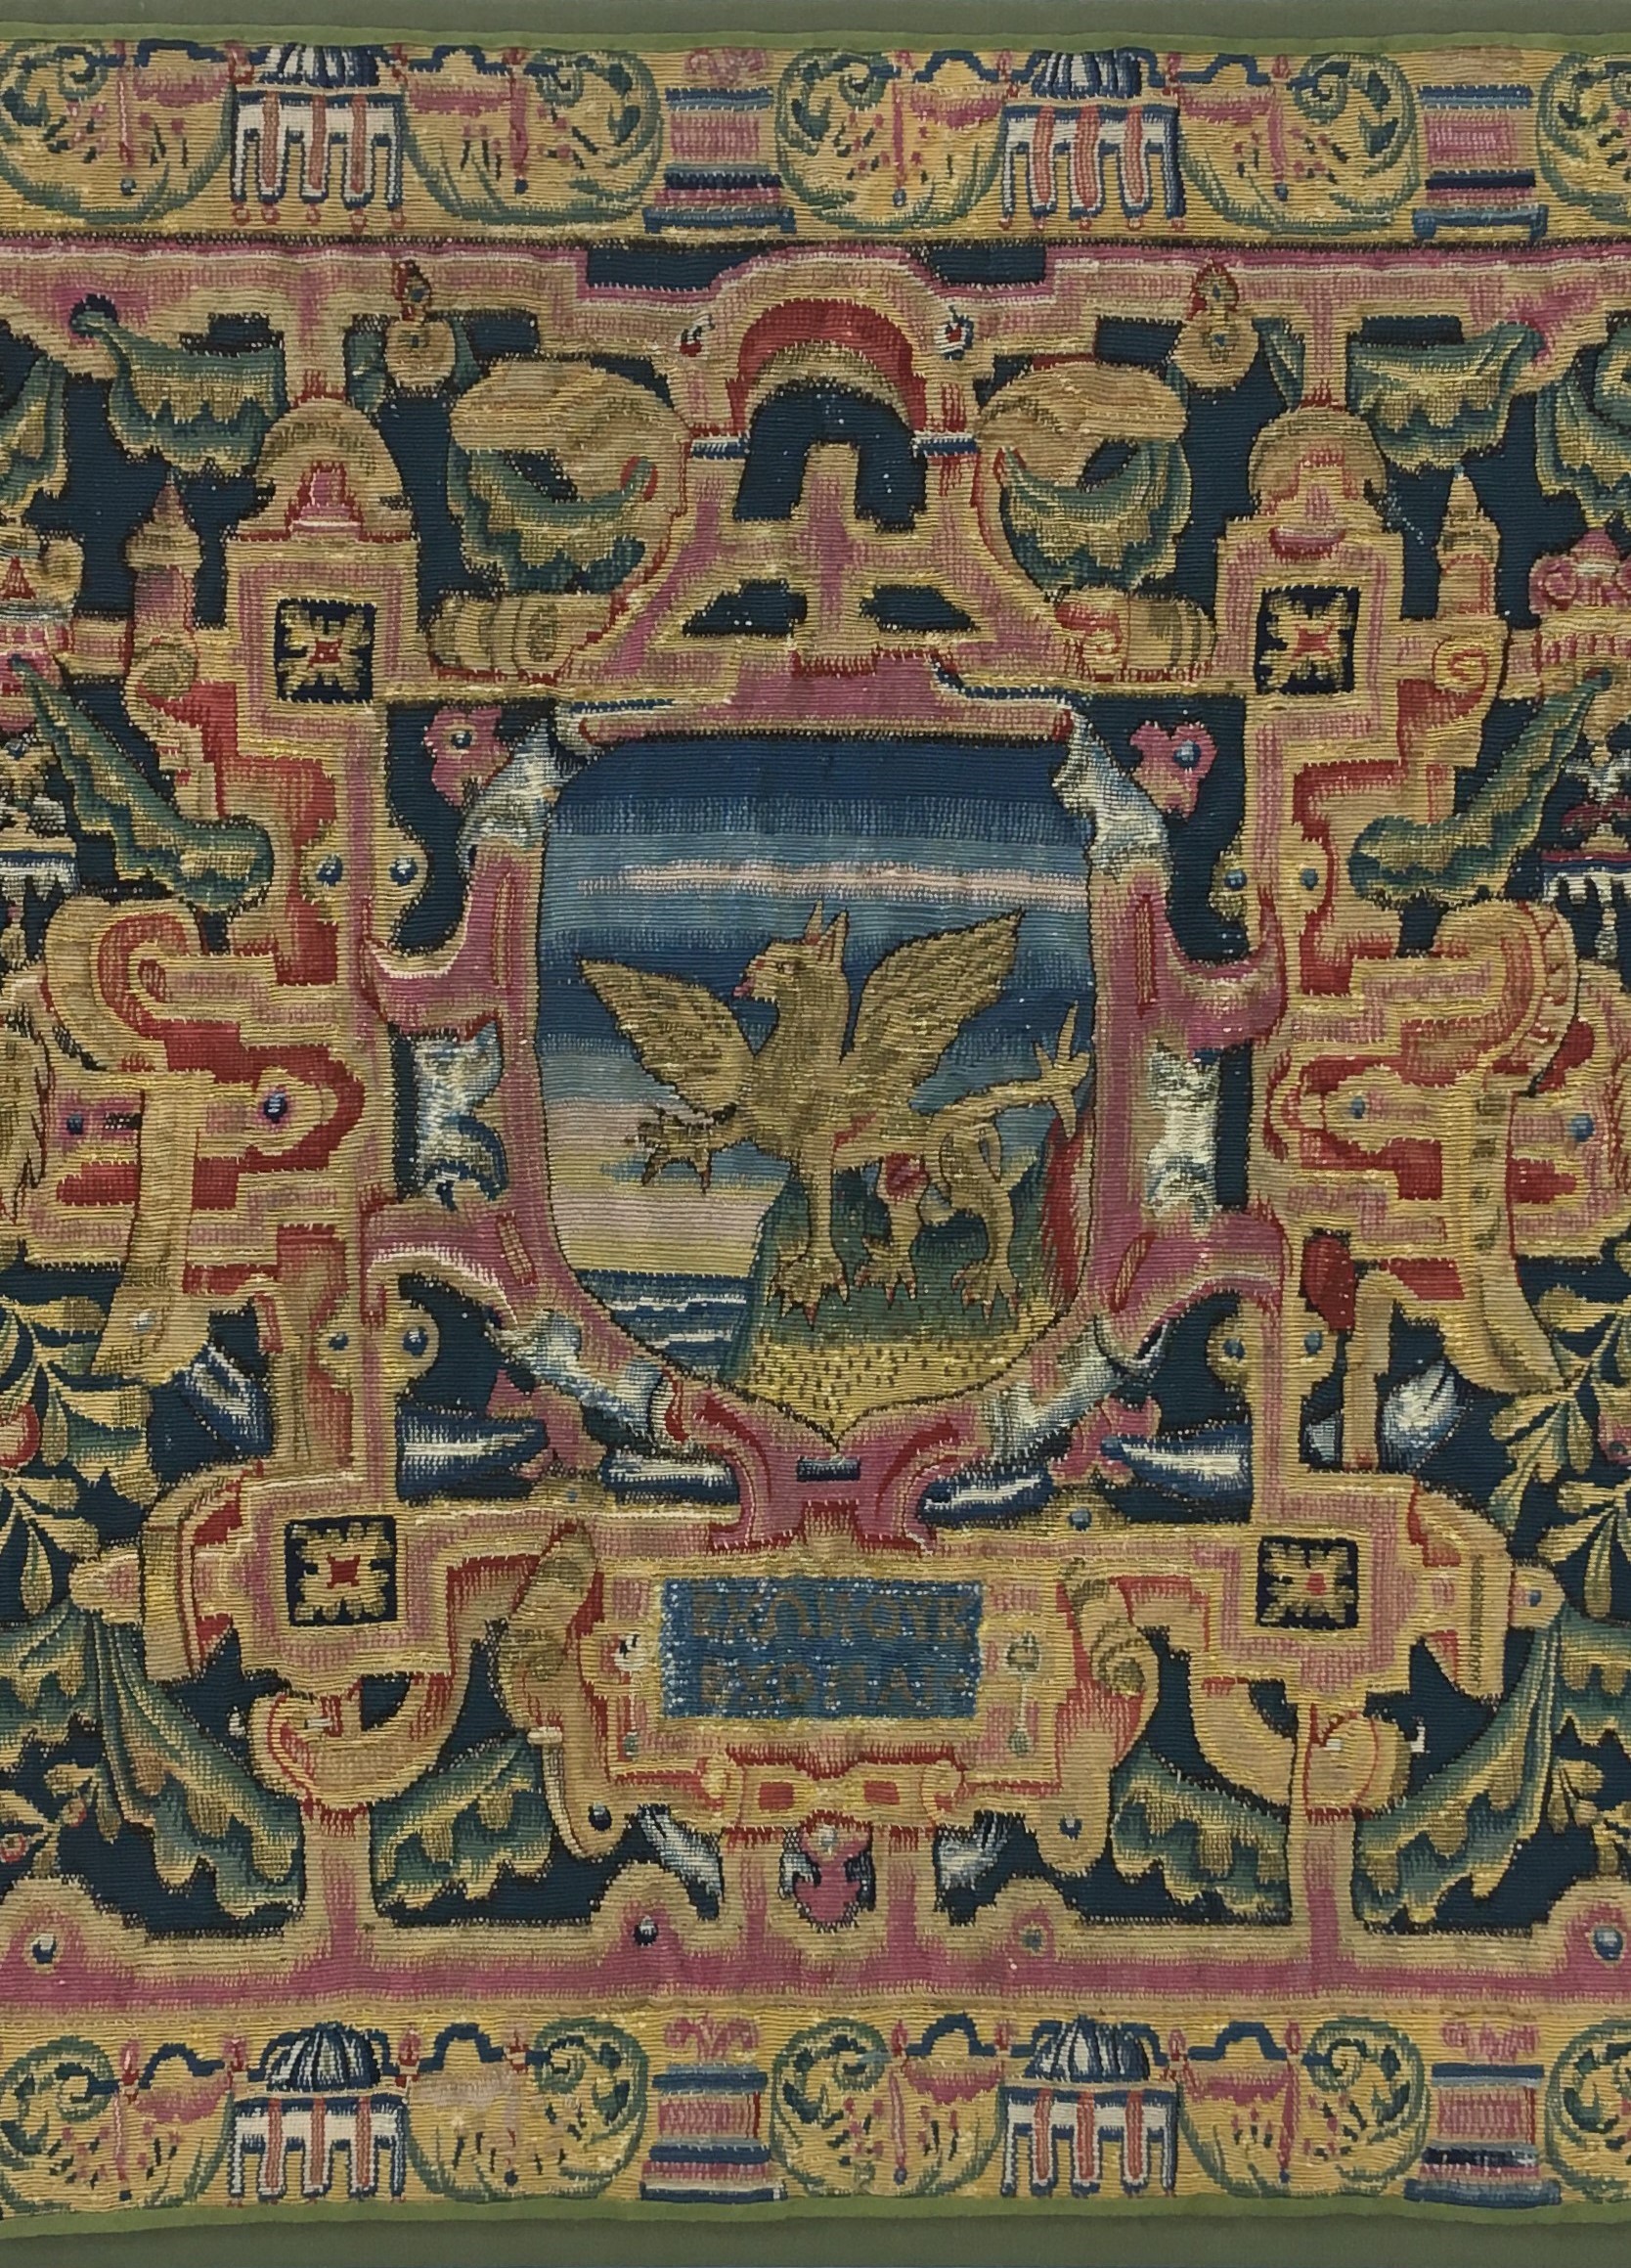 Ornate tapestry with a griffin in the centre and patterns surrounding